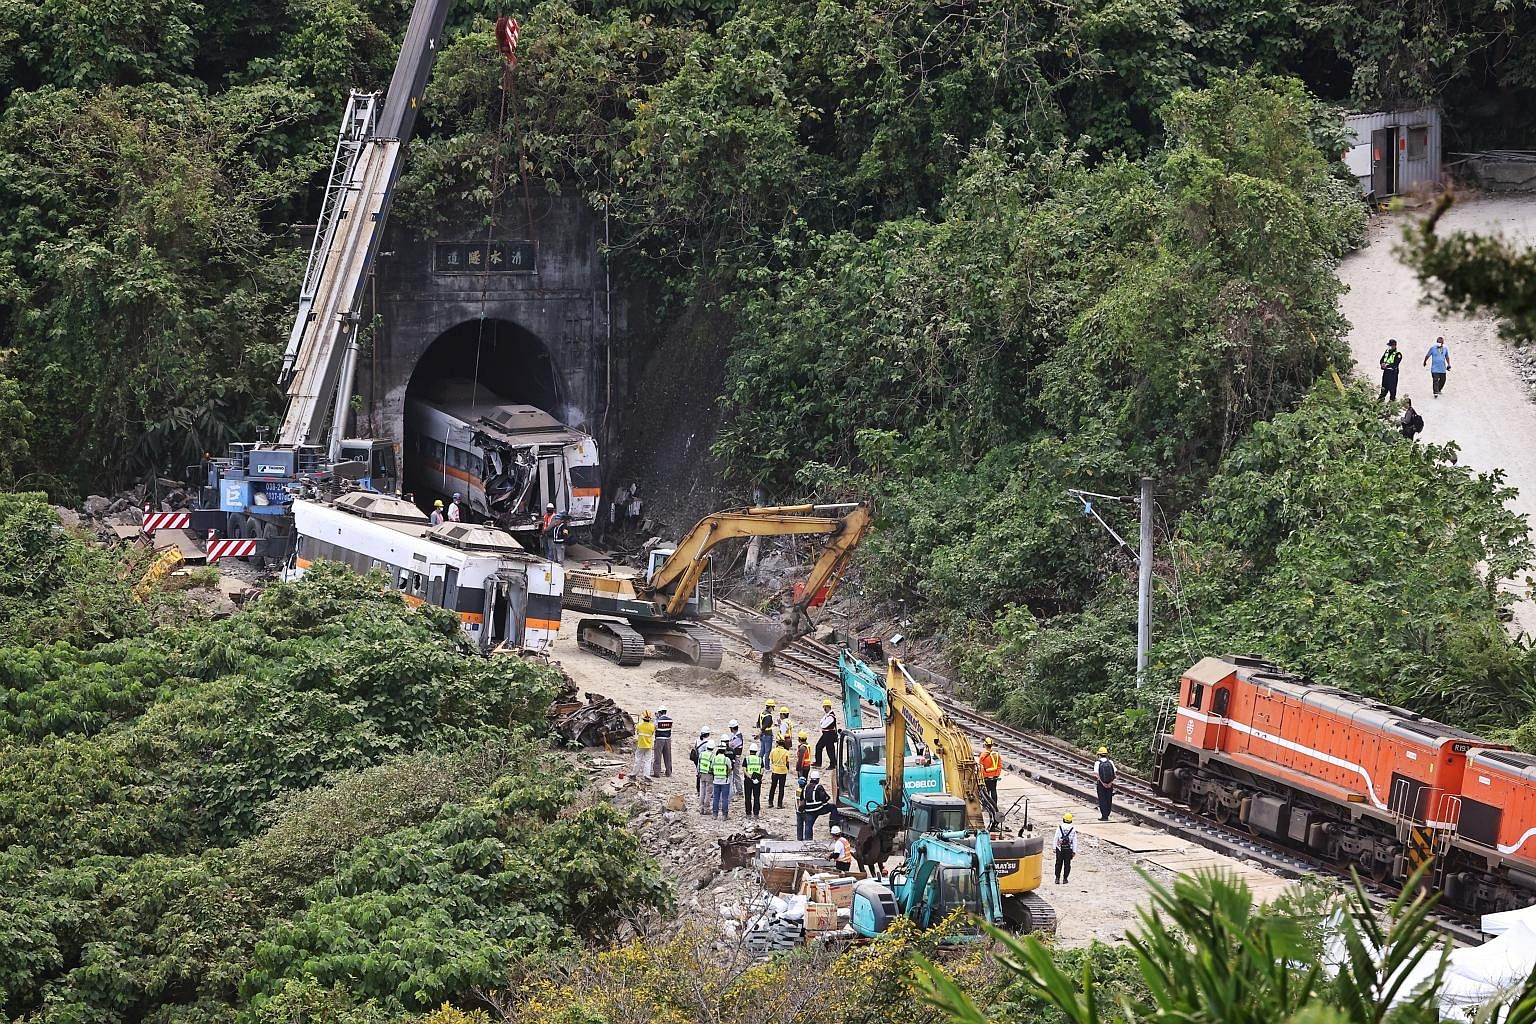 The train was sliced in half when it crashed headlong into the tunnel wall last Friday.